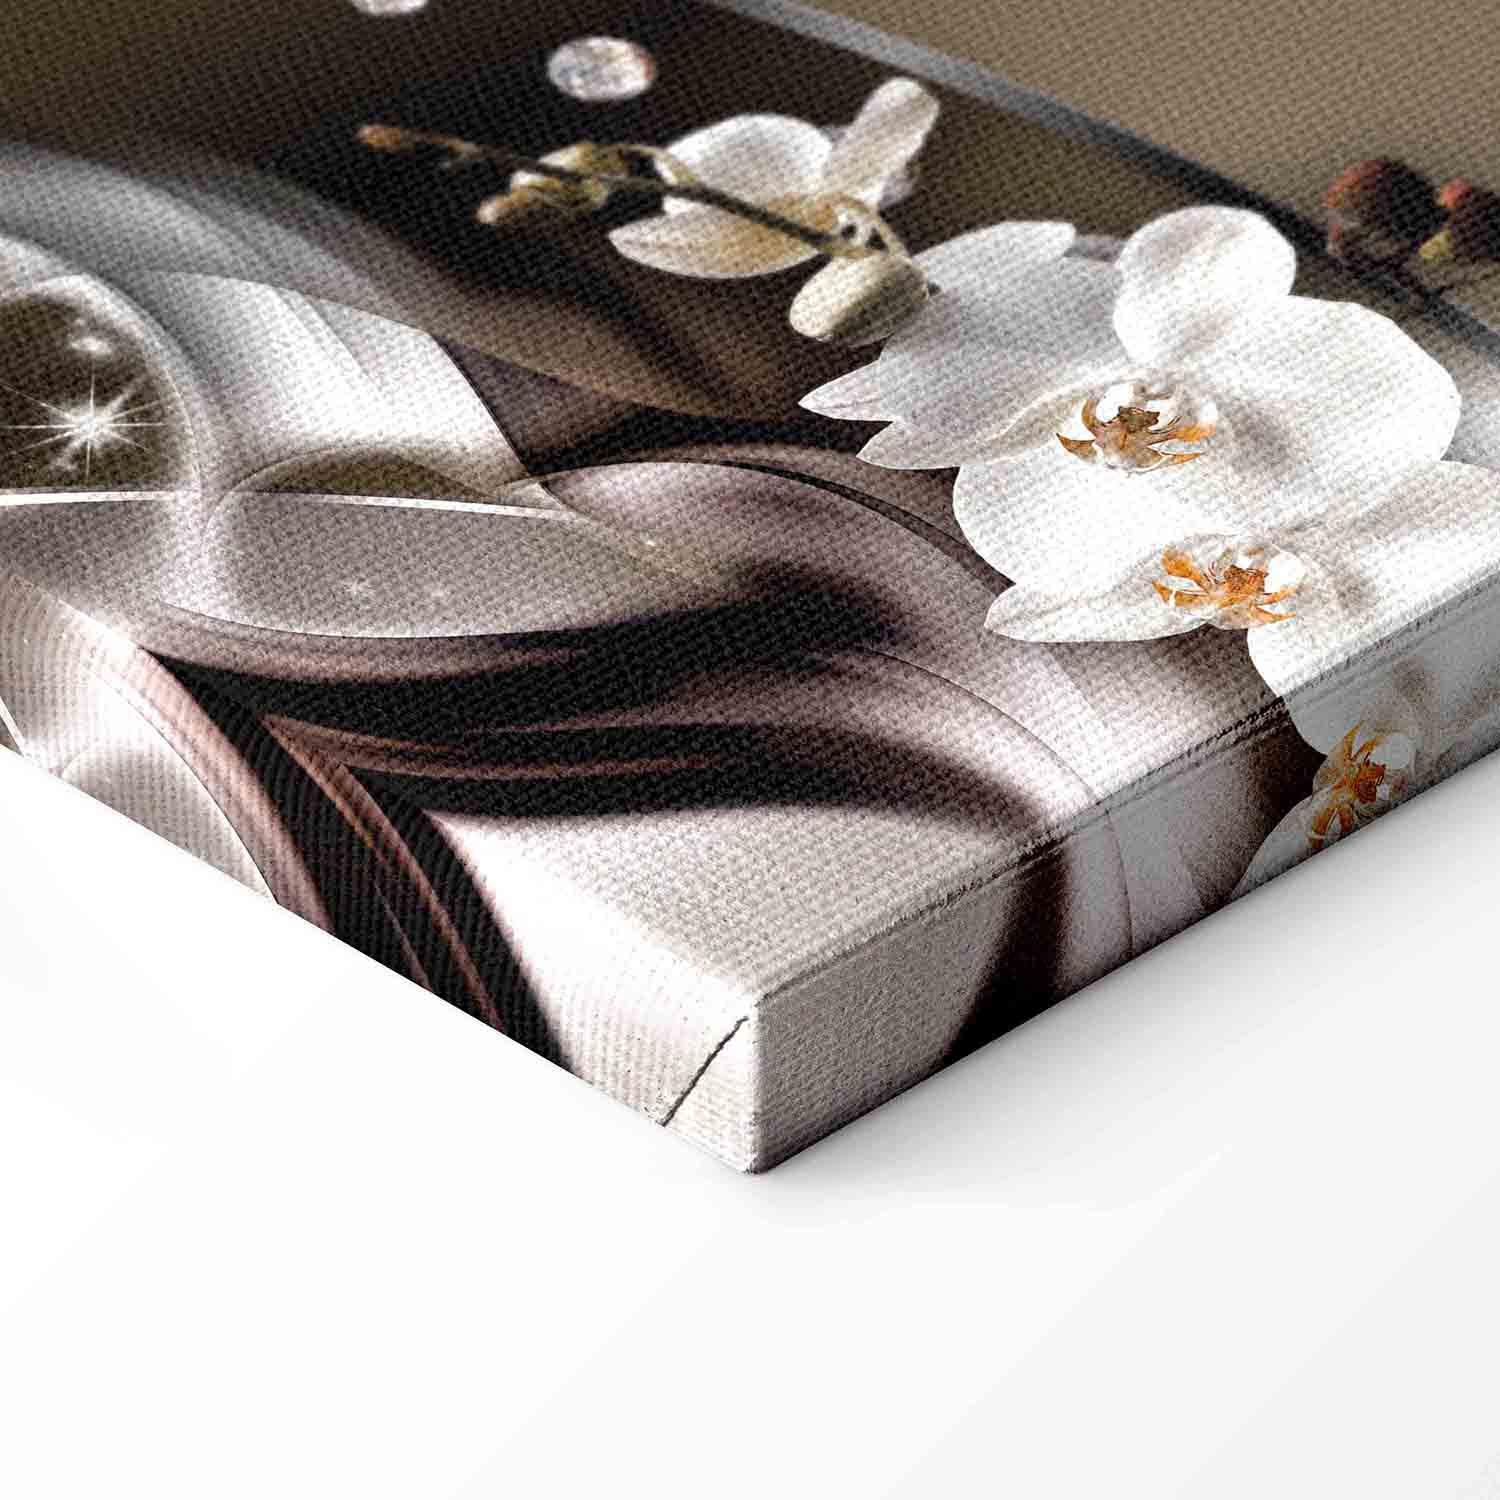 Canvas Chocolate Dance of Orchid